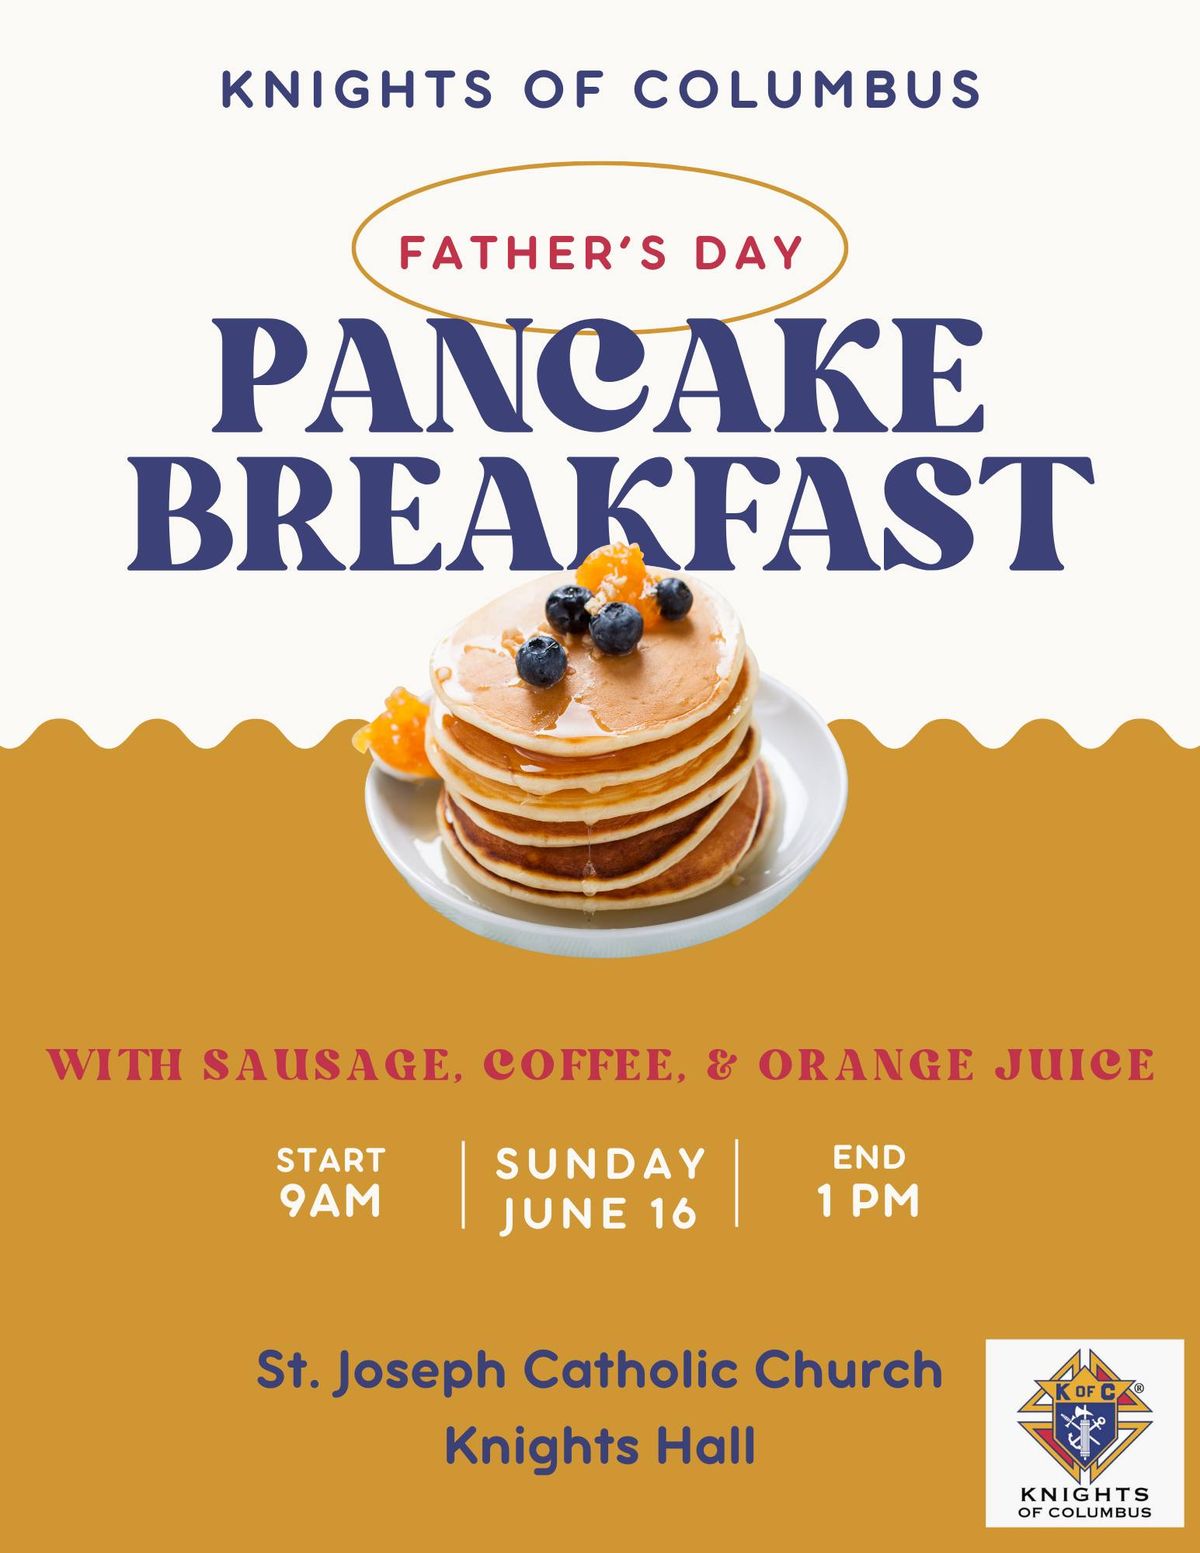 Knights of Columbus Father's Day Pancake Breakfast 